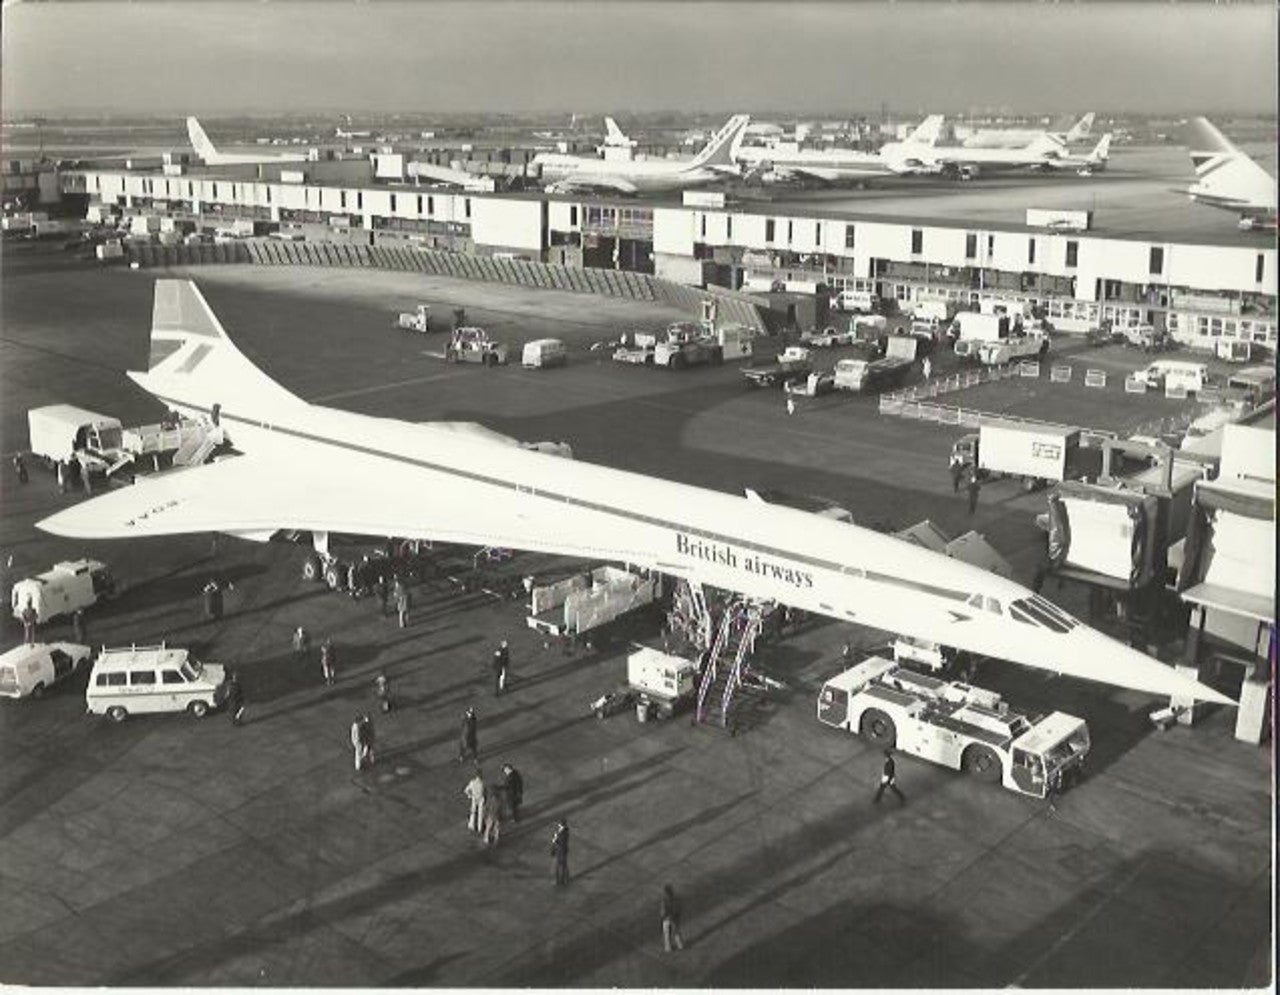 <p>Maiden flight: Preparing the British Airways Concorde for its first commercial journey from London Heathrow to Bahrain on 21 January 1976</p>